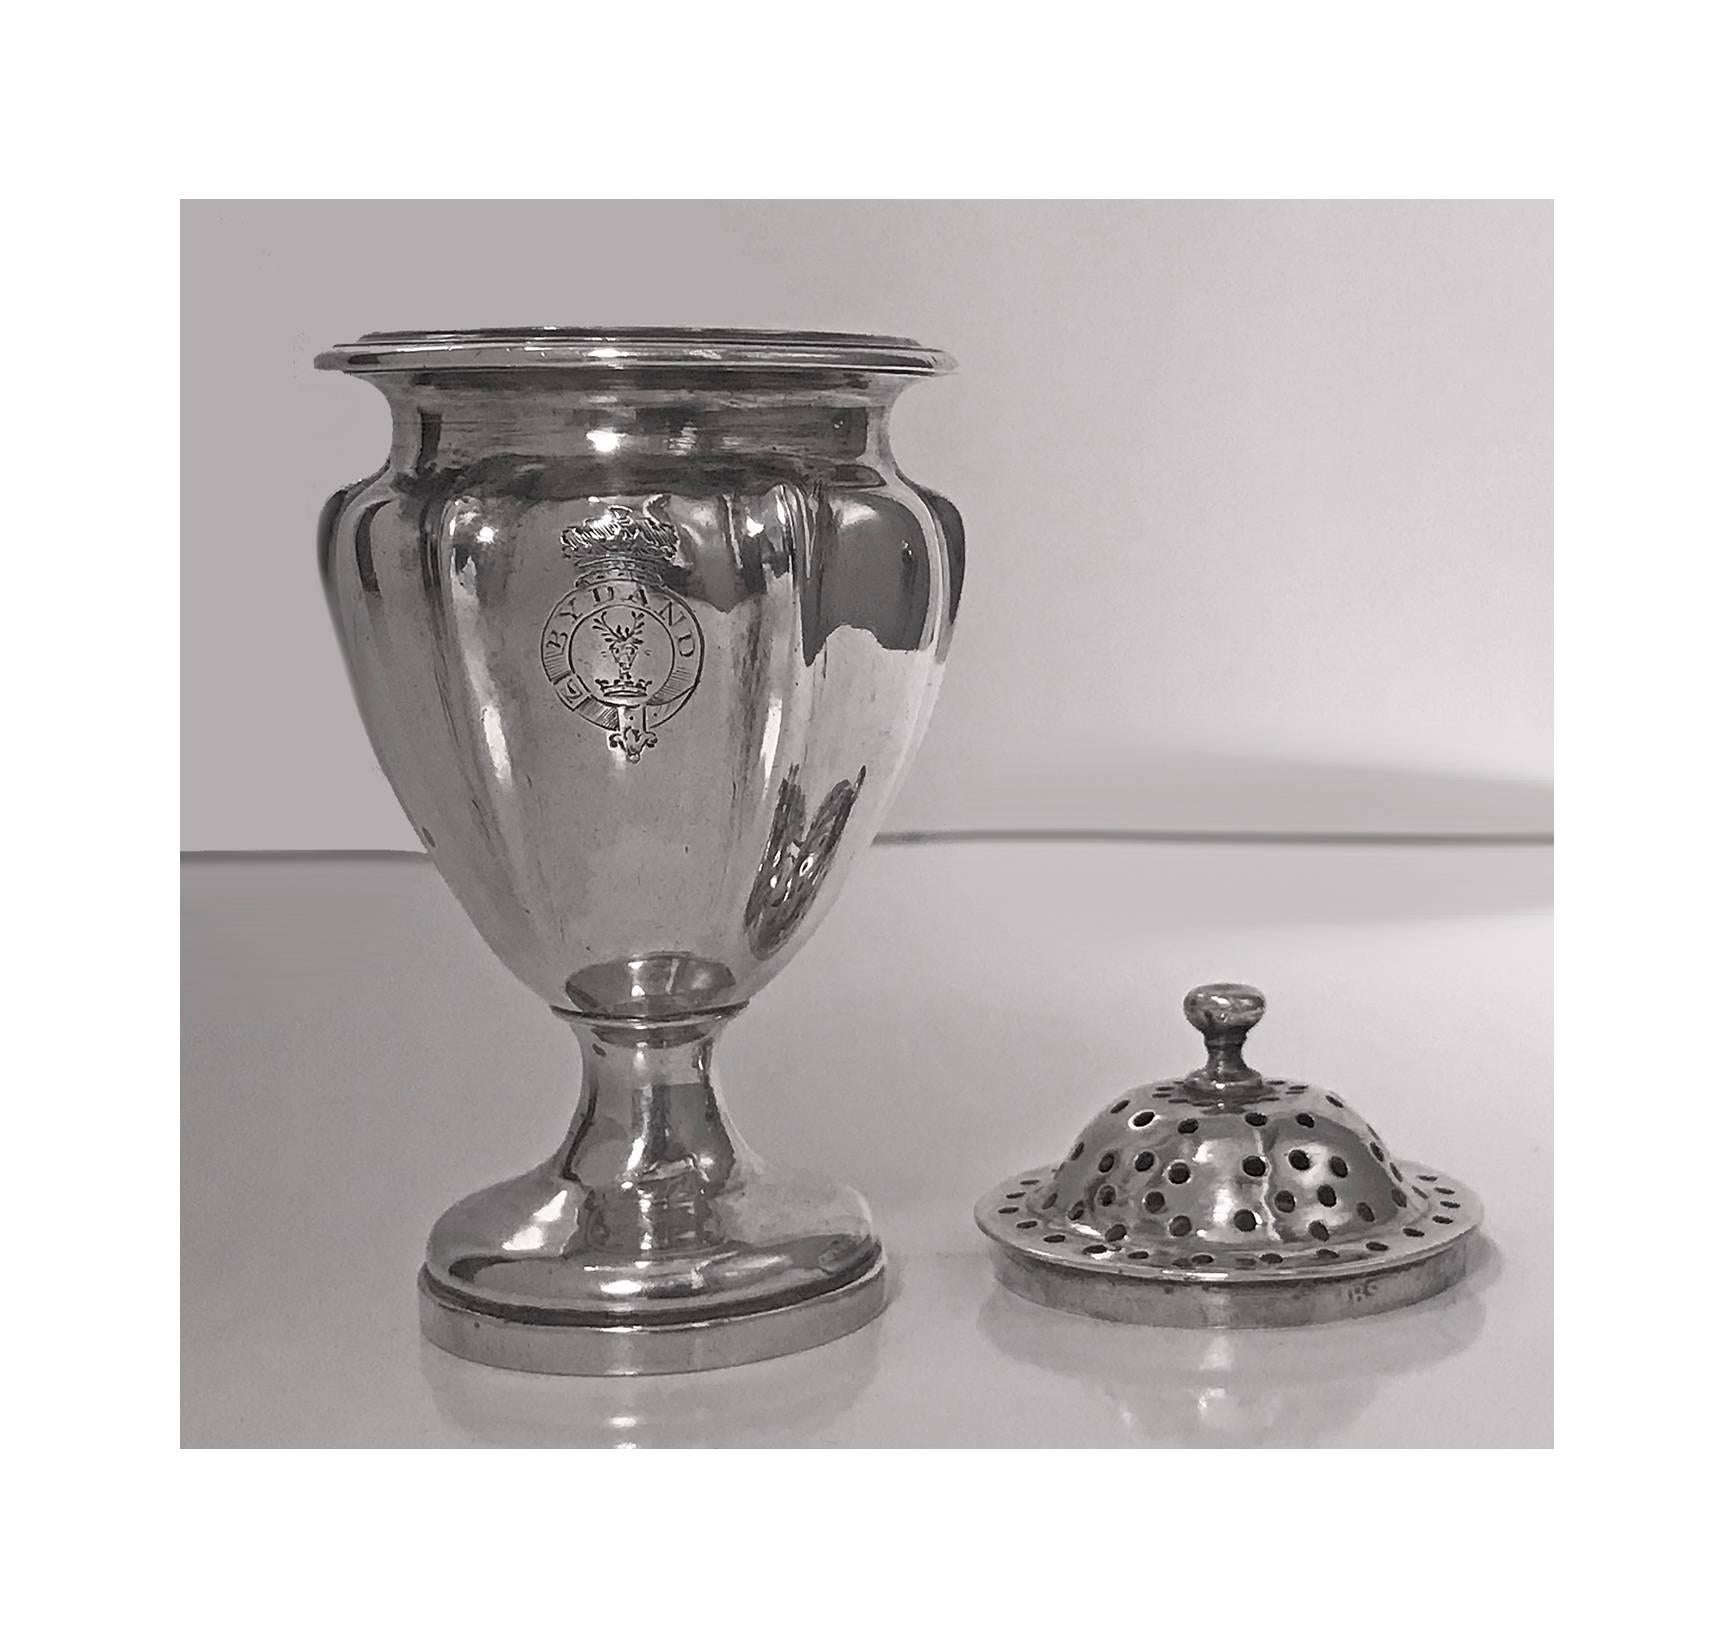 Antique silver pounce pot, London circa 1830, Benjamin Stephens. The pot of tapered vase form, round pedestal base, removable pierced cover. Marked on body and cover and engraved crest of a stags head erased and motto Bydand... Remain for Gordon.